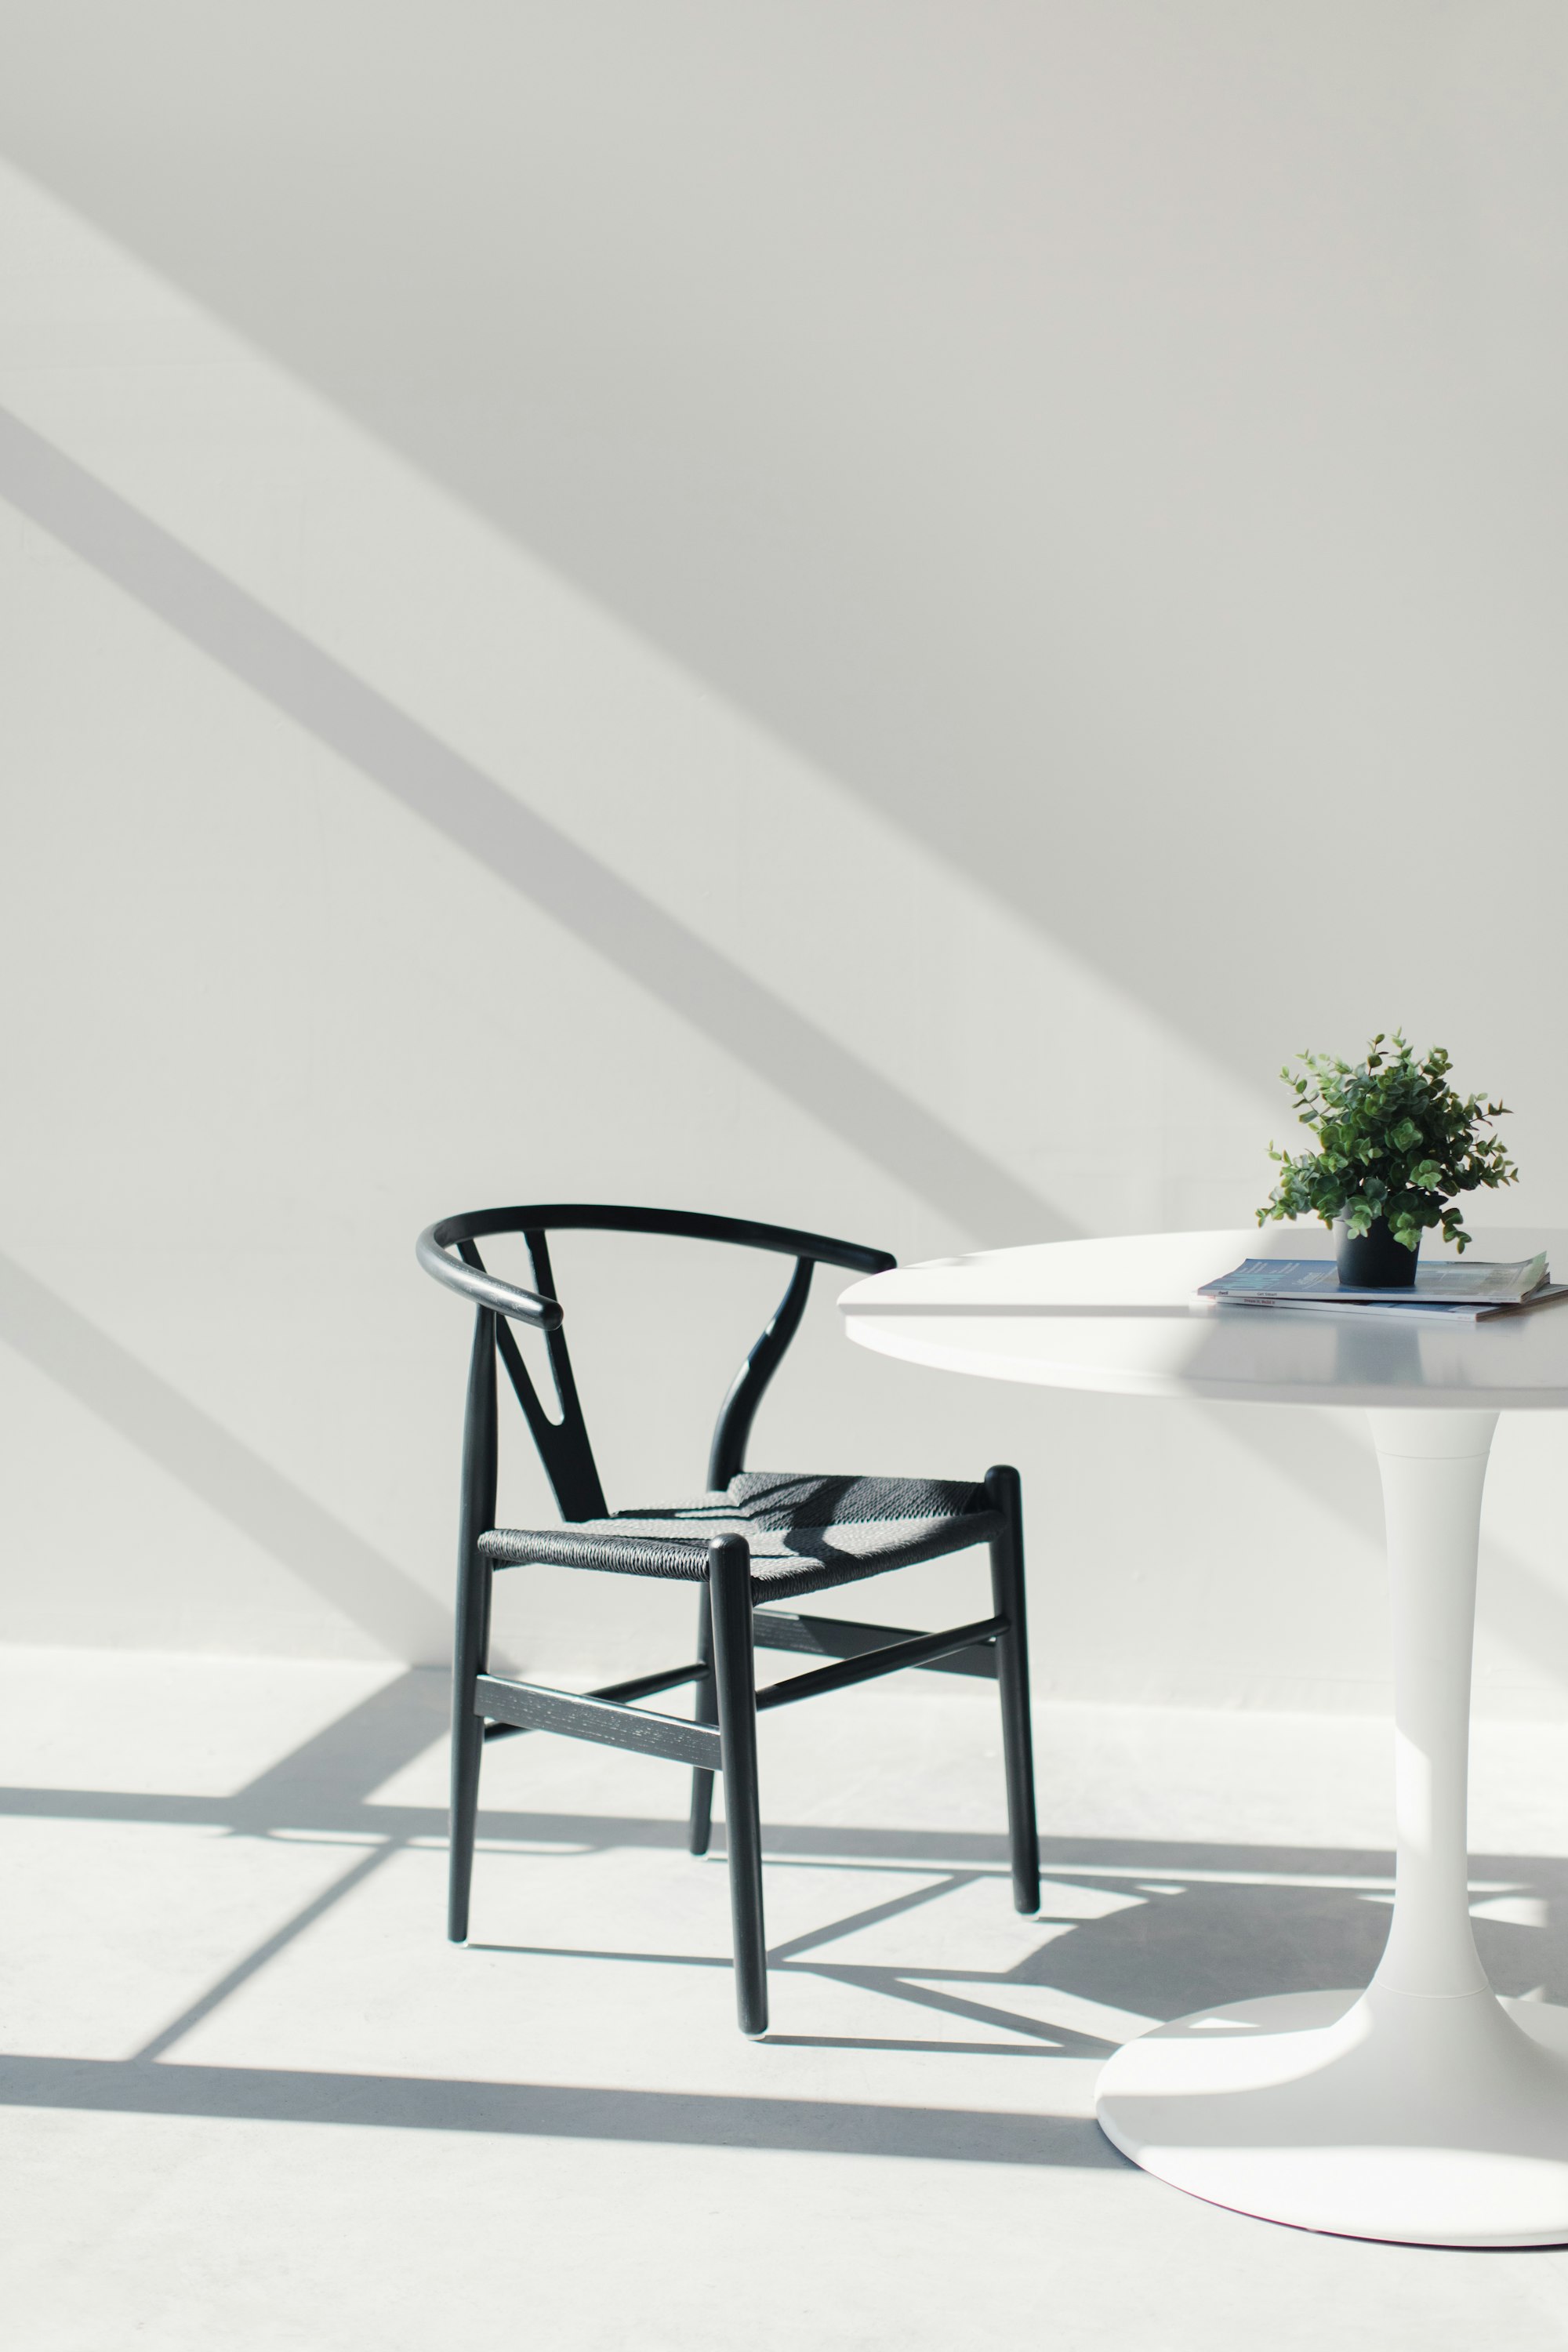 A Wishbone chair in a brightly lit with tulip table